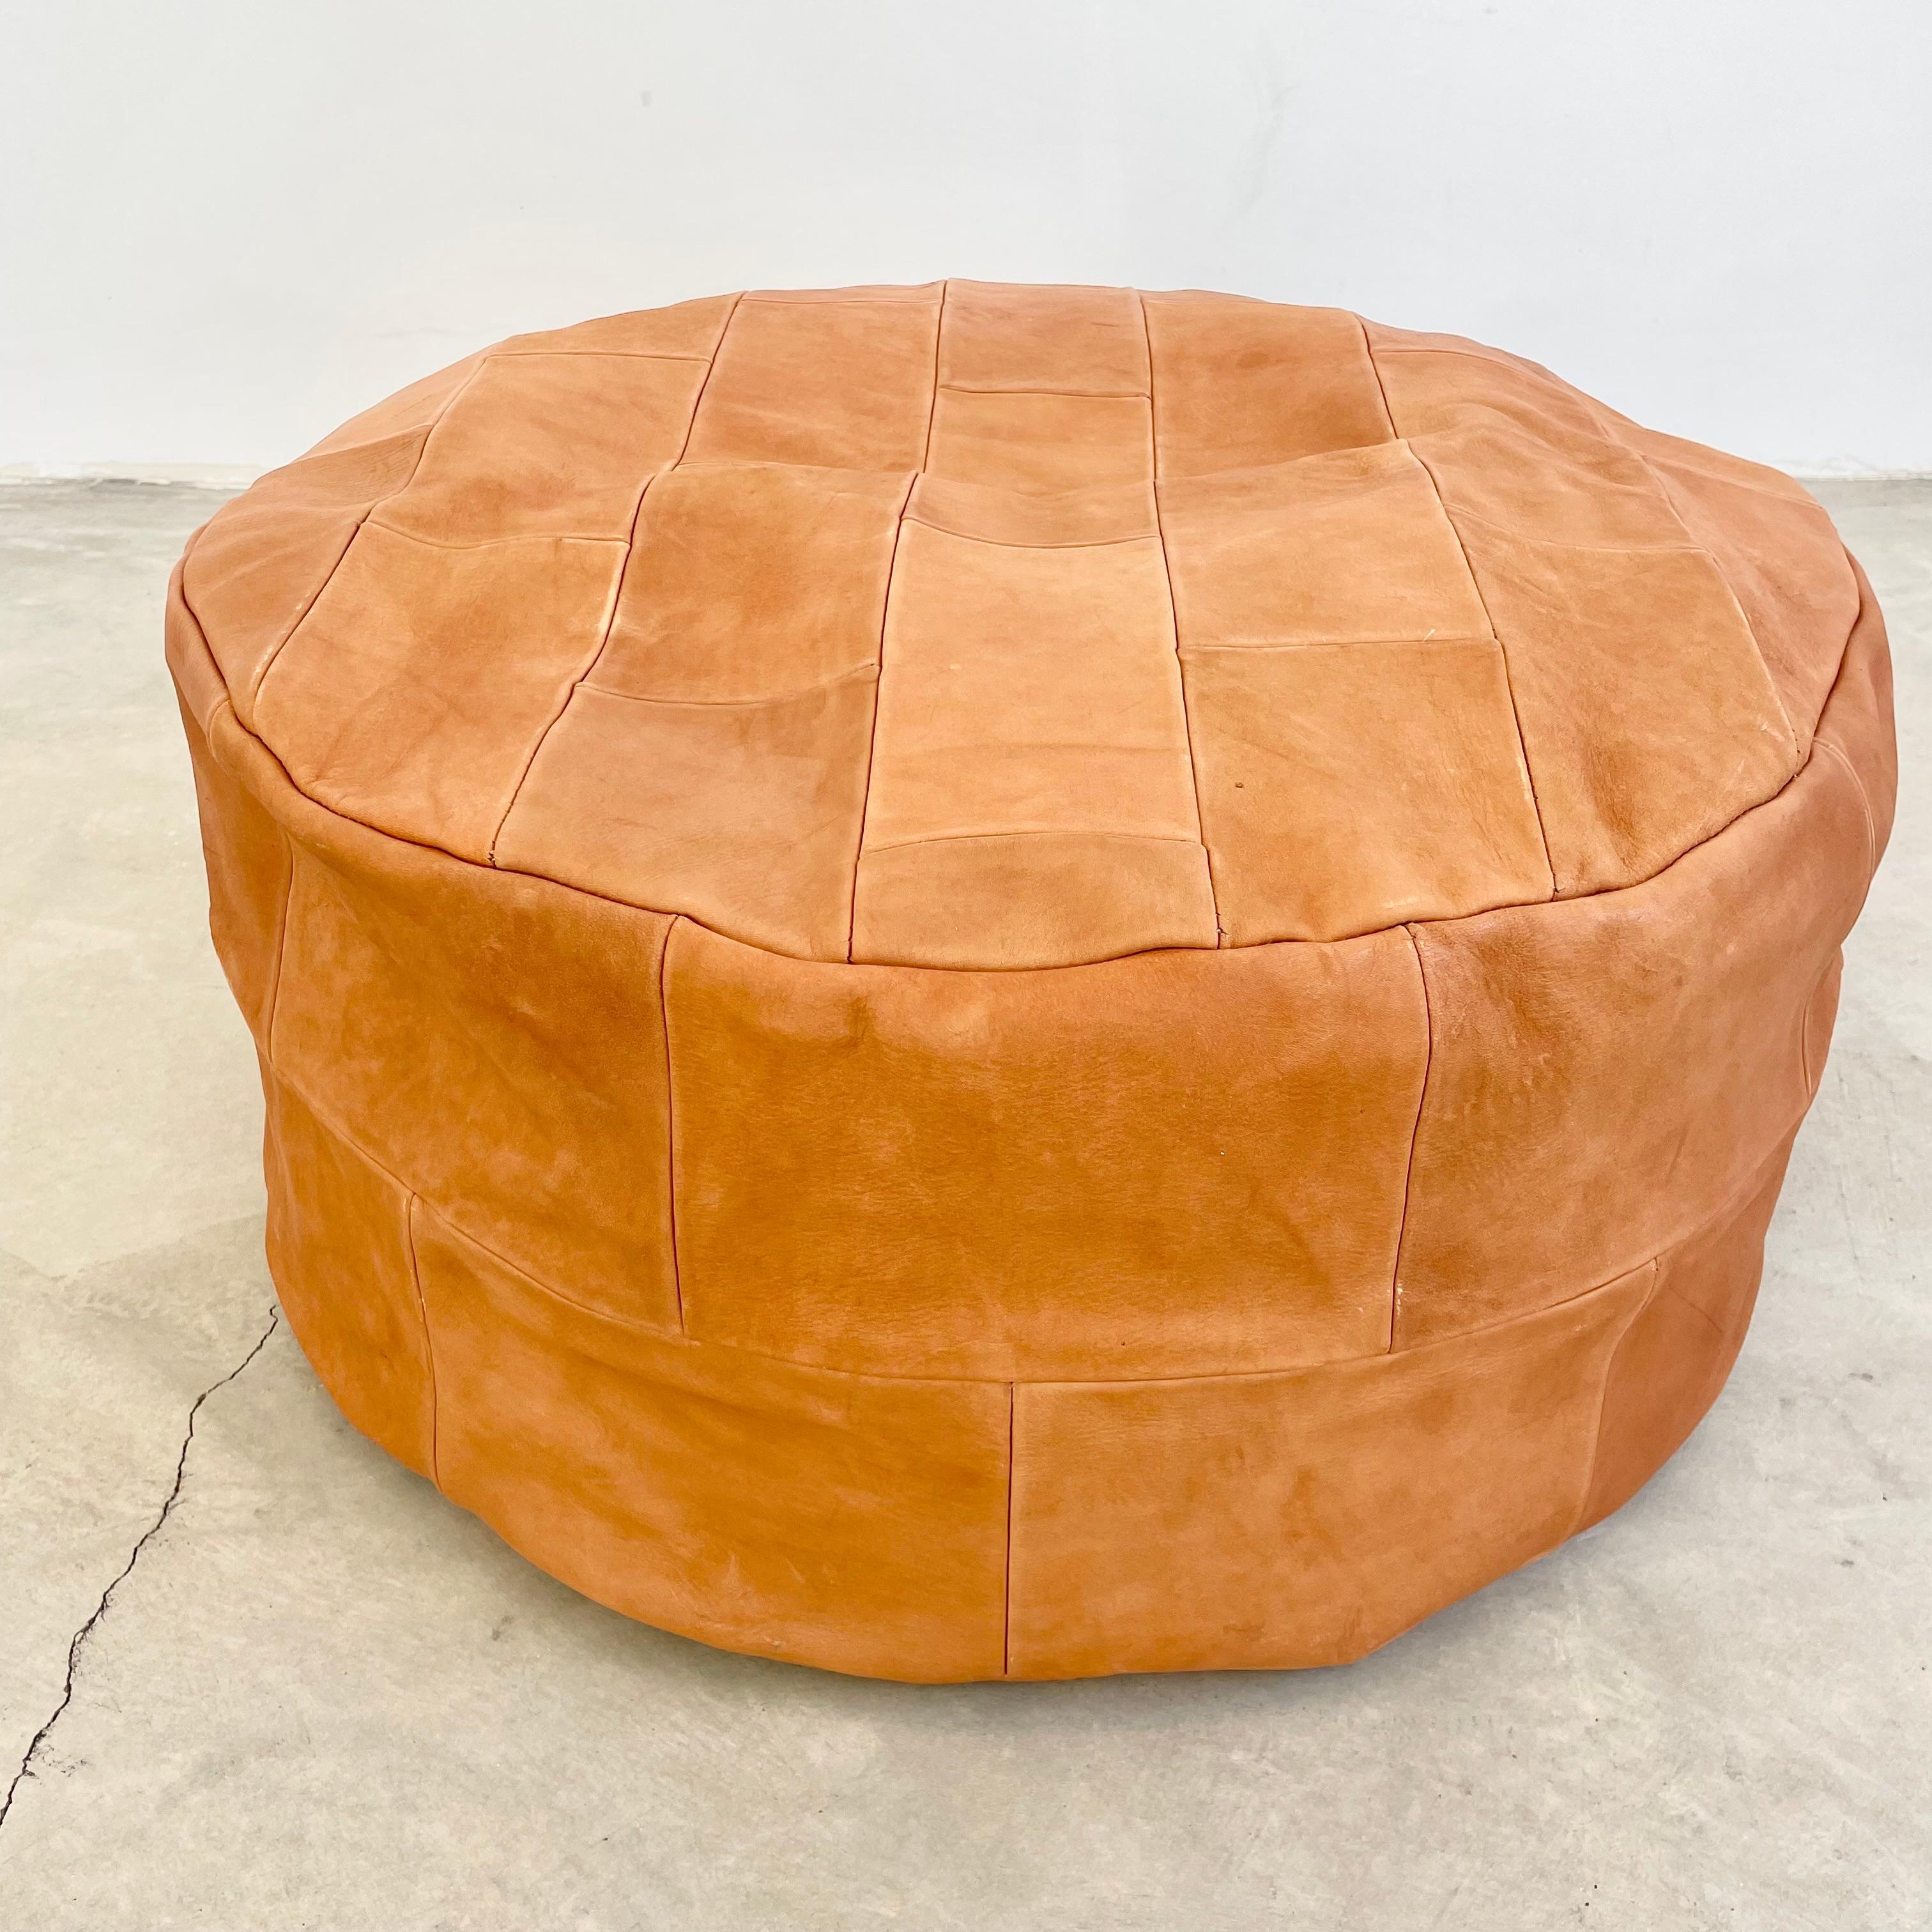 Mid-Century Modern Patchwork Saddle Leather Pouf, Morocco For Sale